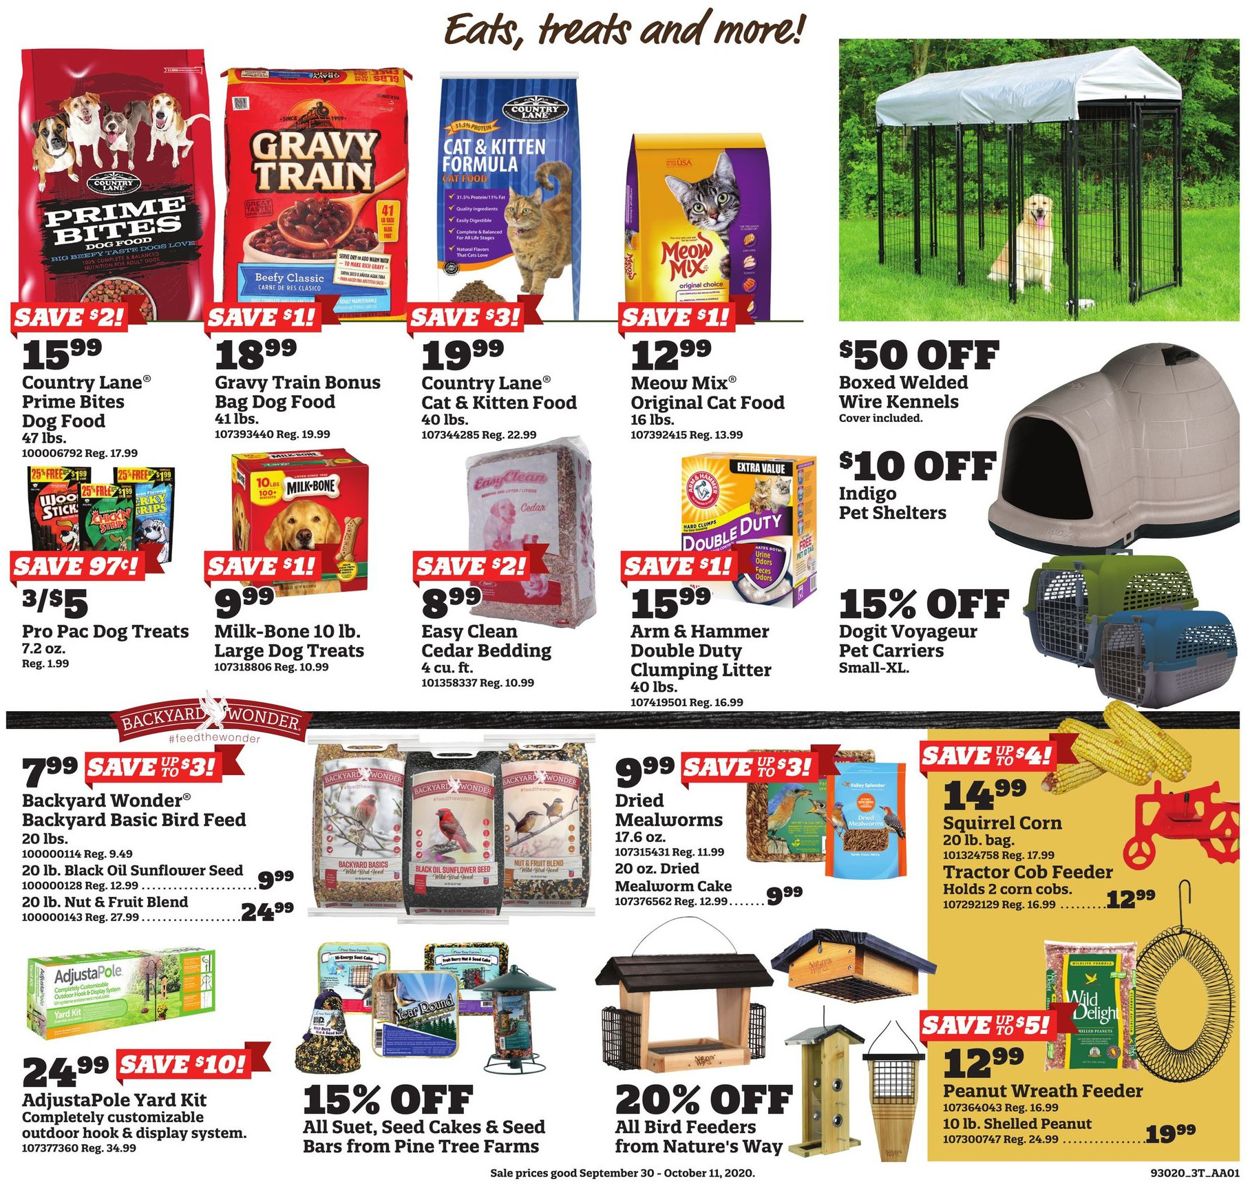 Orscheln Farm and Home Current weekly ad 09/30 10/11/2020 [3